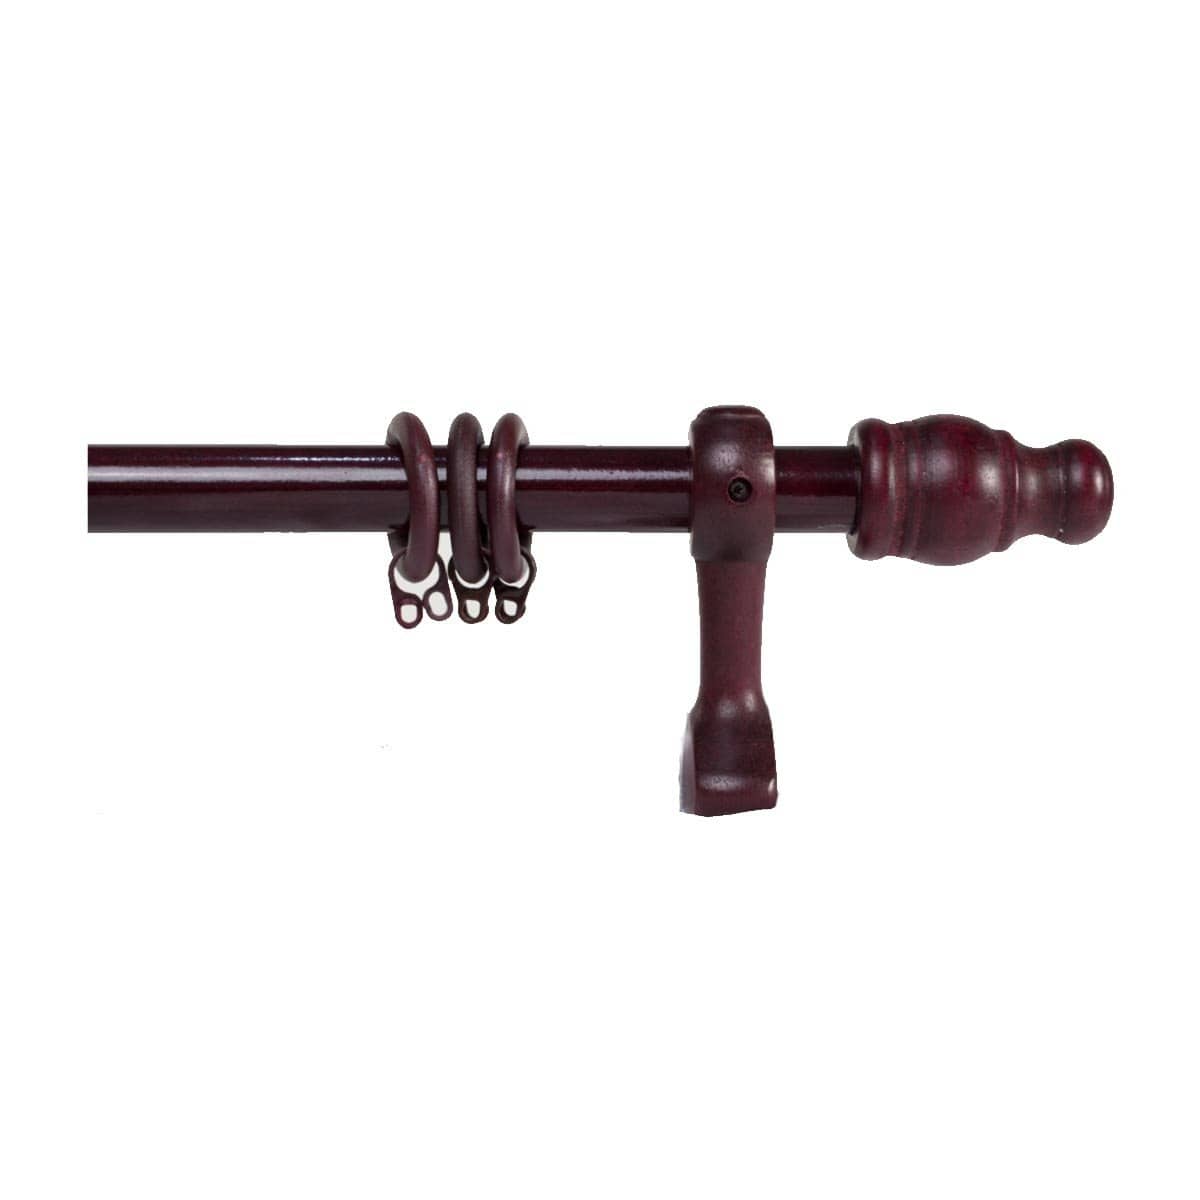 FWCR534 Wooden Curtain Rod 5' Rosewood